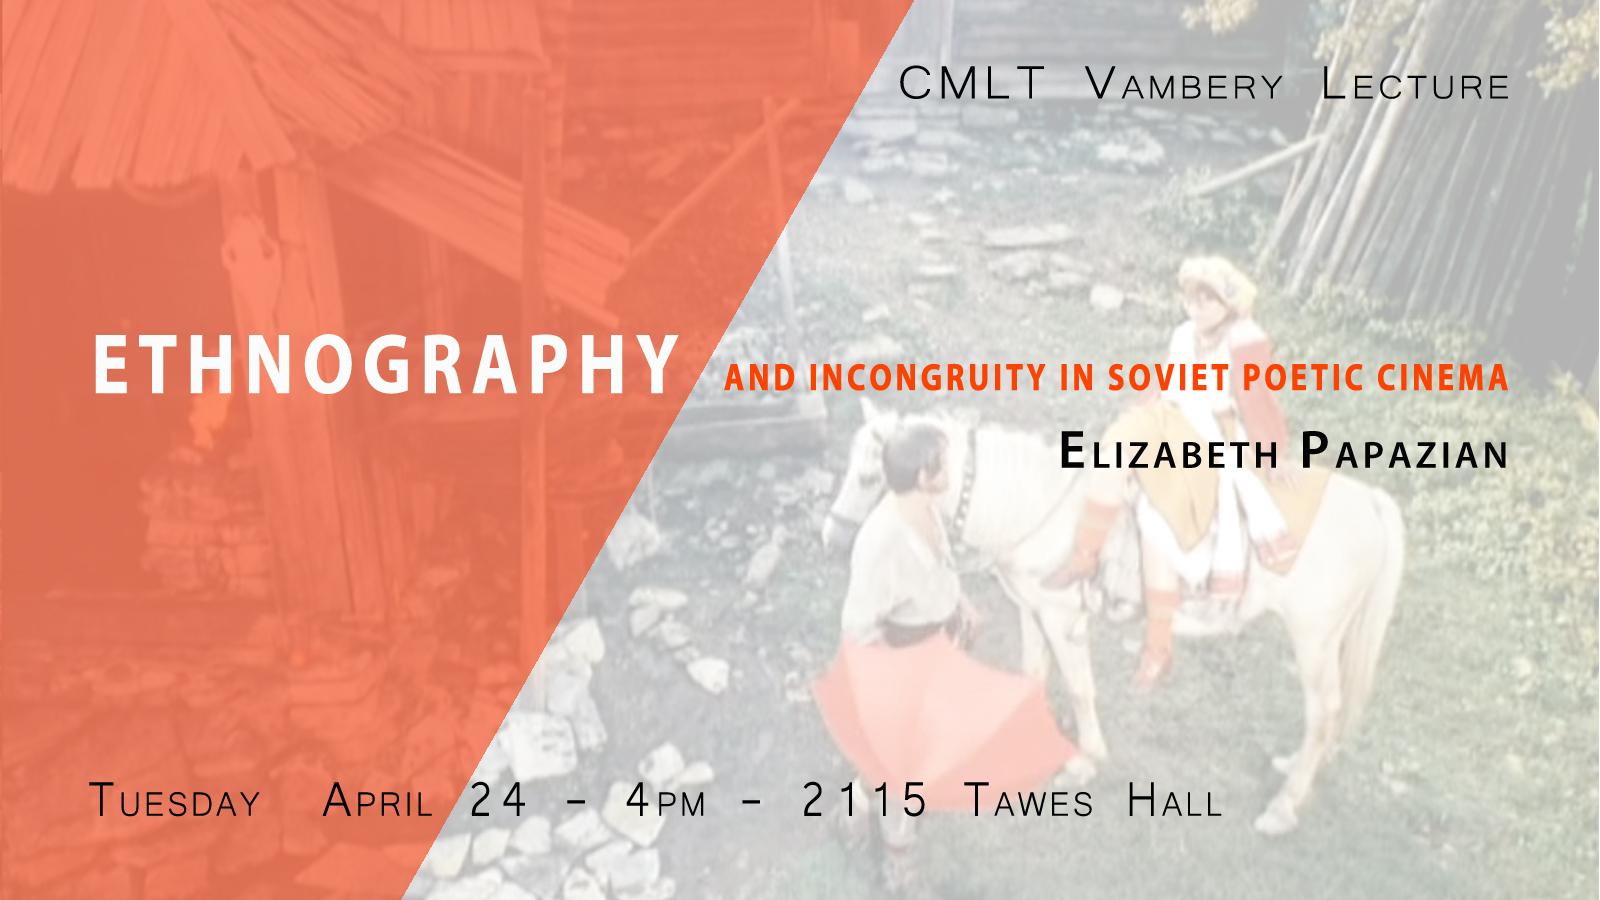 Annual CMLT Vambery Lecture: Elizabeth Papazian